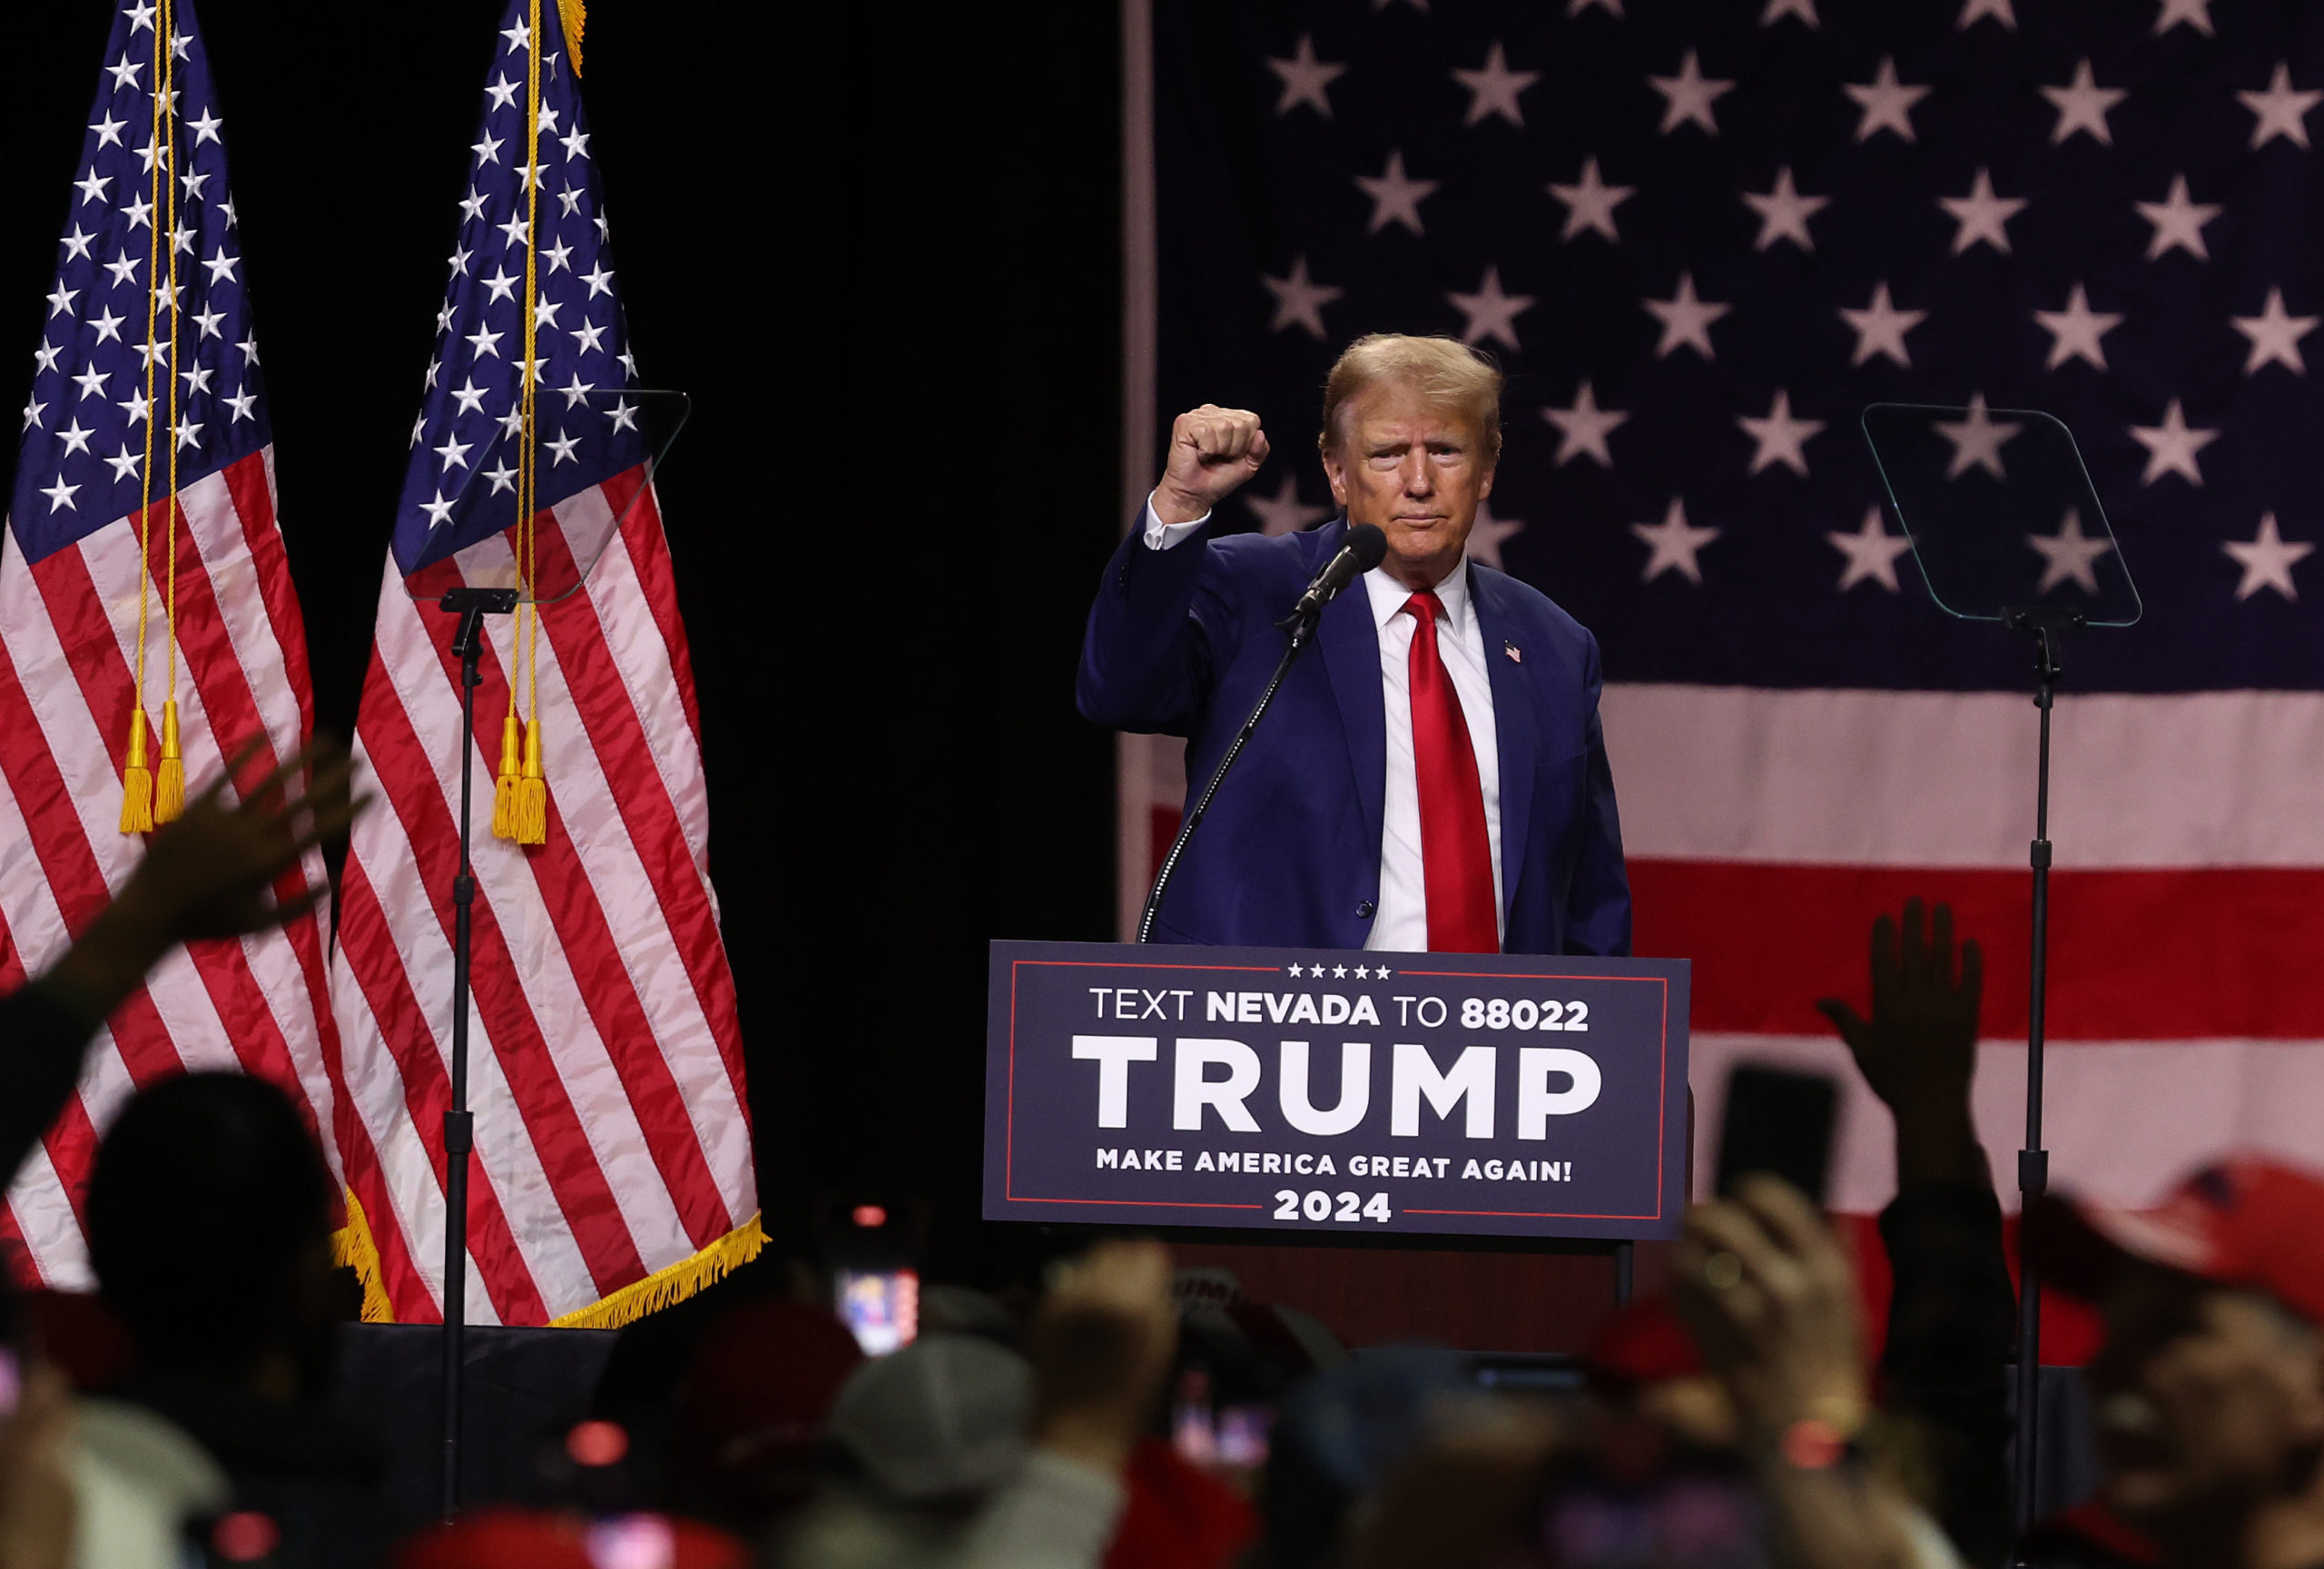 RENO, NEVADA - DECEMBER 17: Republican Presidential candidate former U.S. President Donald Trump gestures during a campaign rally at the Reno-Sparks Convention Center on December 17, 2023 in Reno, Nevada. Former U.S. President Trump held a campaign rally as he battles to become the Republican Presidential nominee for the 2024 Presidential election. (Photo by Justin Sullivan/Getty Images)